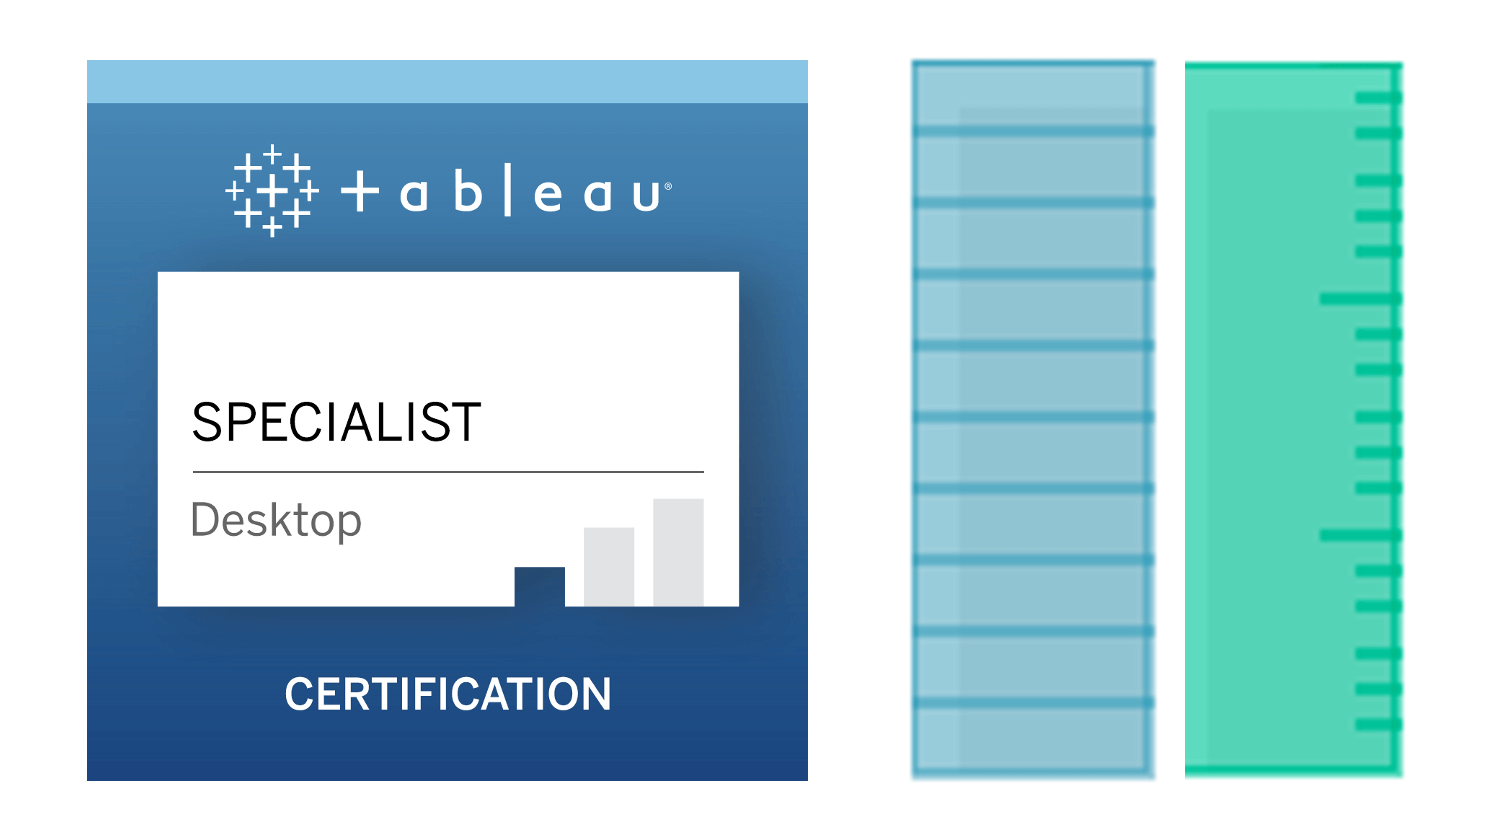 3 things I learned by taking the Tableau exam